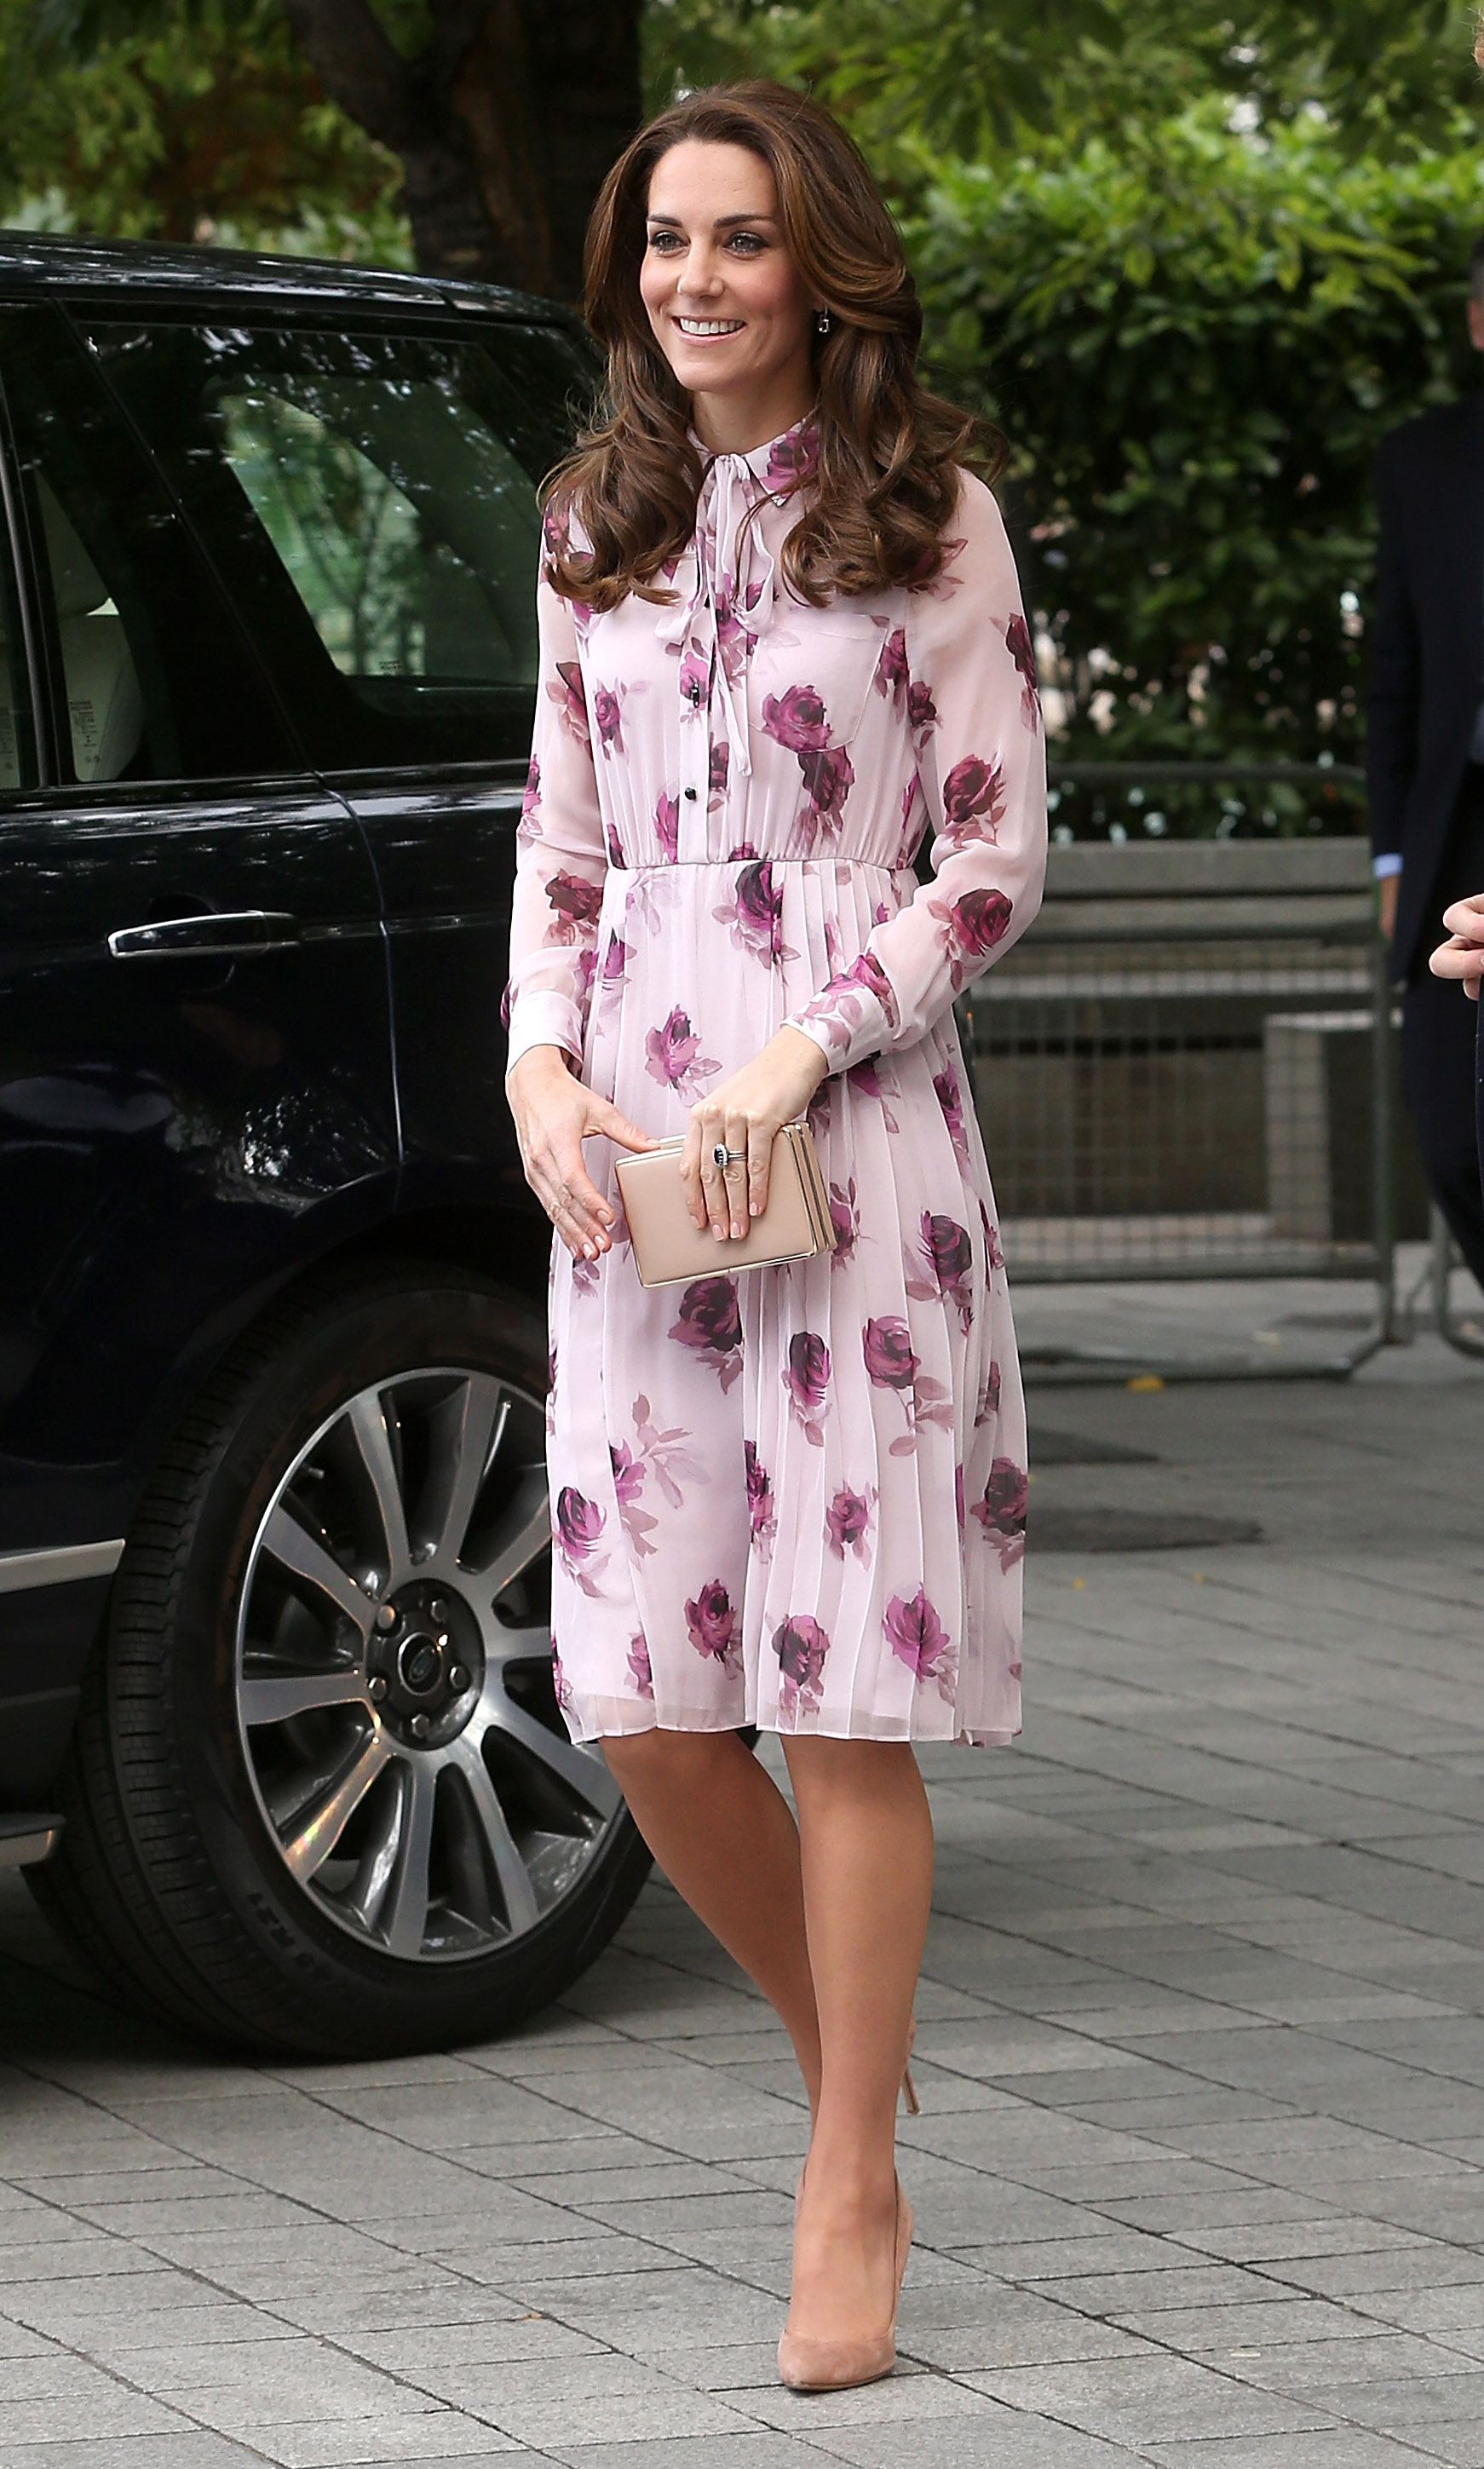 LONDON, ENGLAND - OCTOBER 10: Catherine, Duchess of Cambridge celebrates World Mental Health Day with Heads Together at the London Eye on October 10, 2016 in London, England. (Photo by Danny Martindale/GC Images)